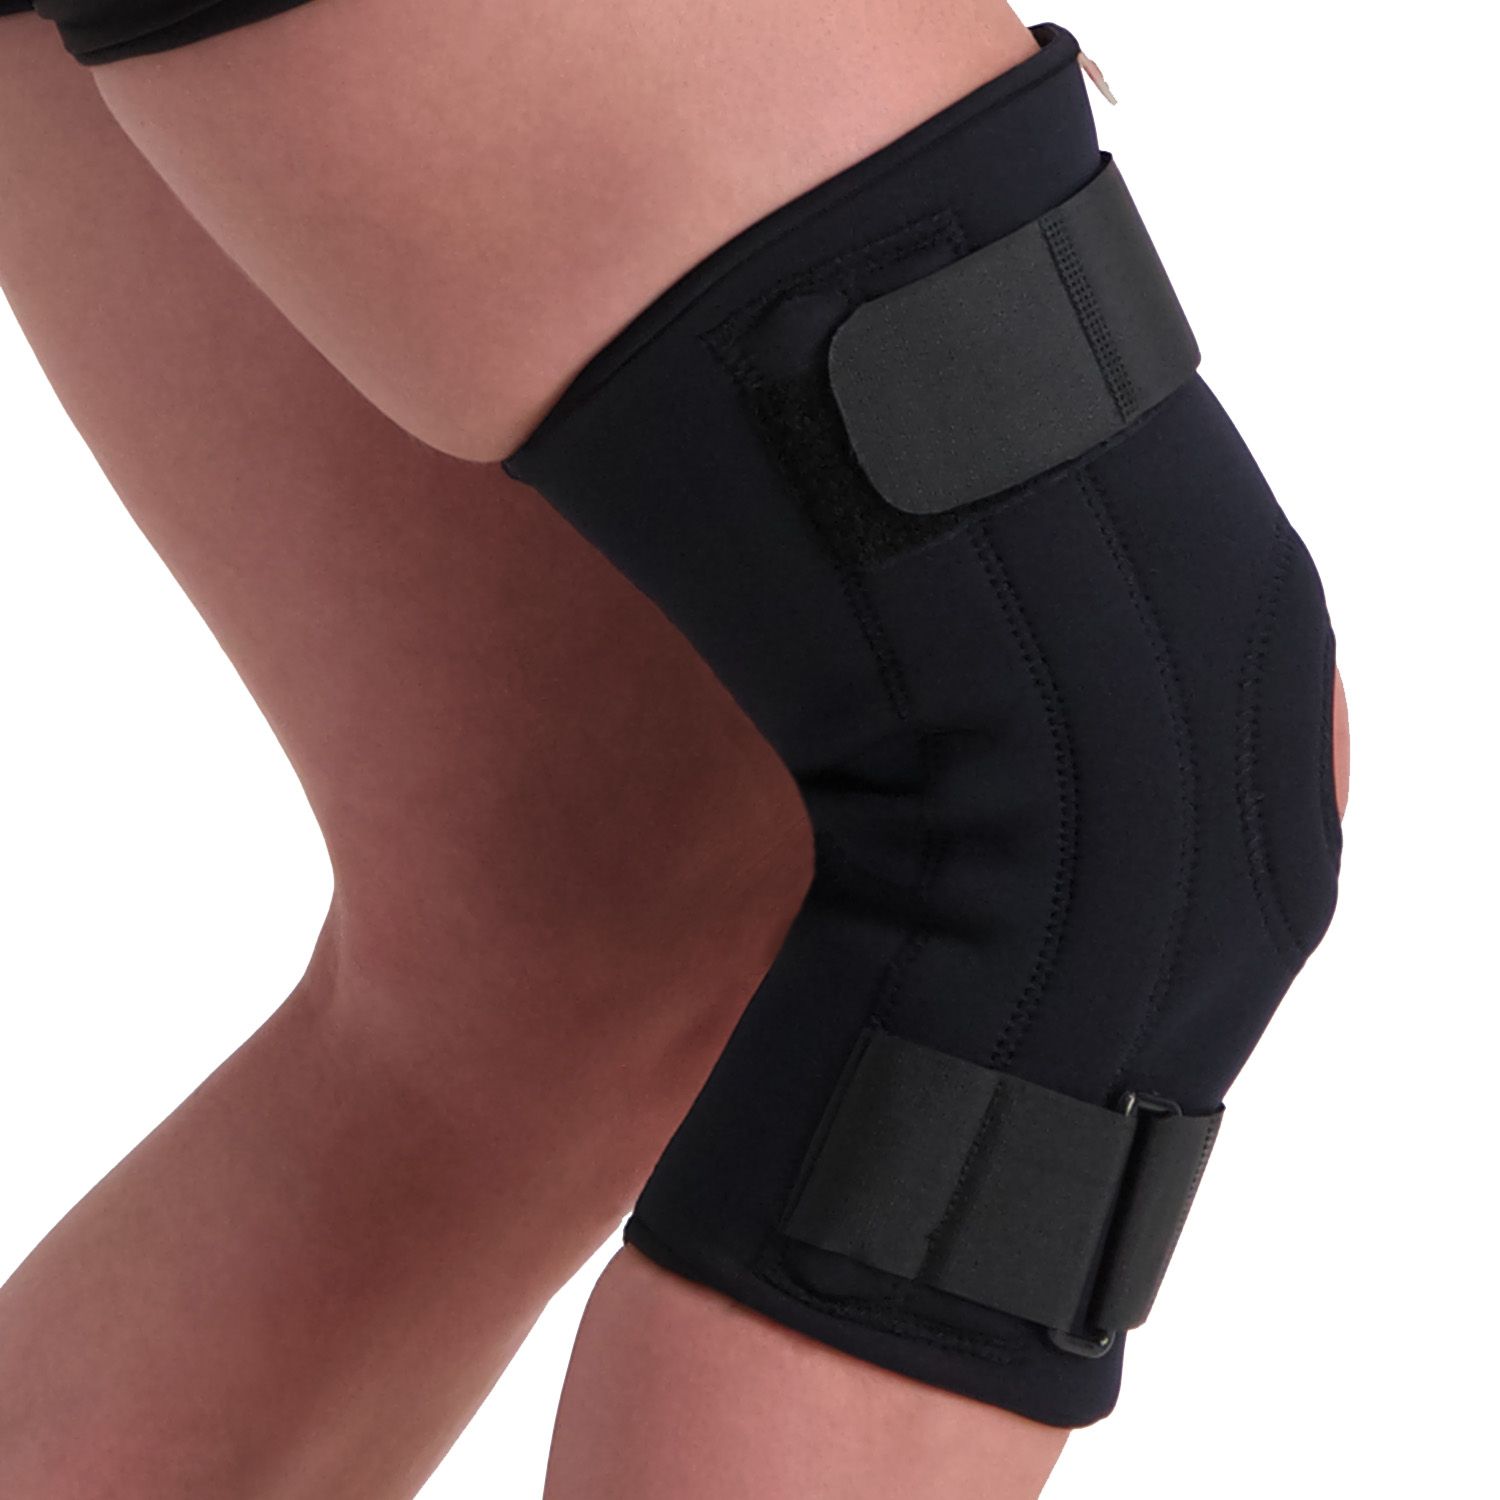 super ortho knee support with splints side view